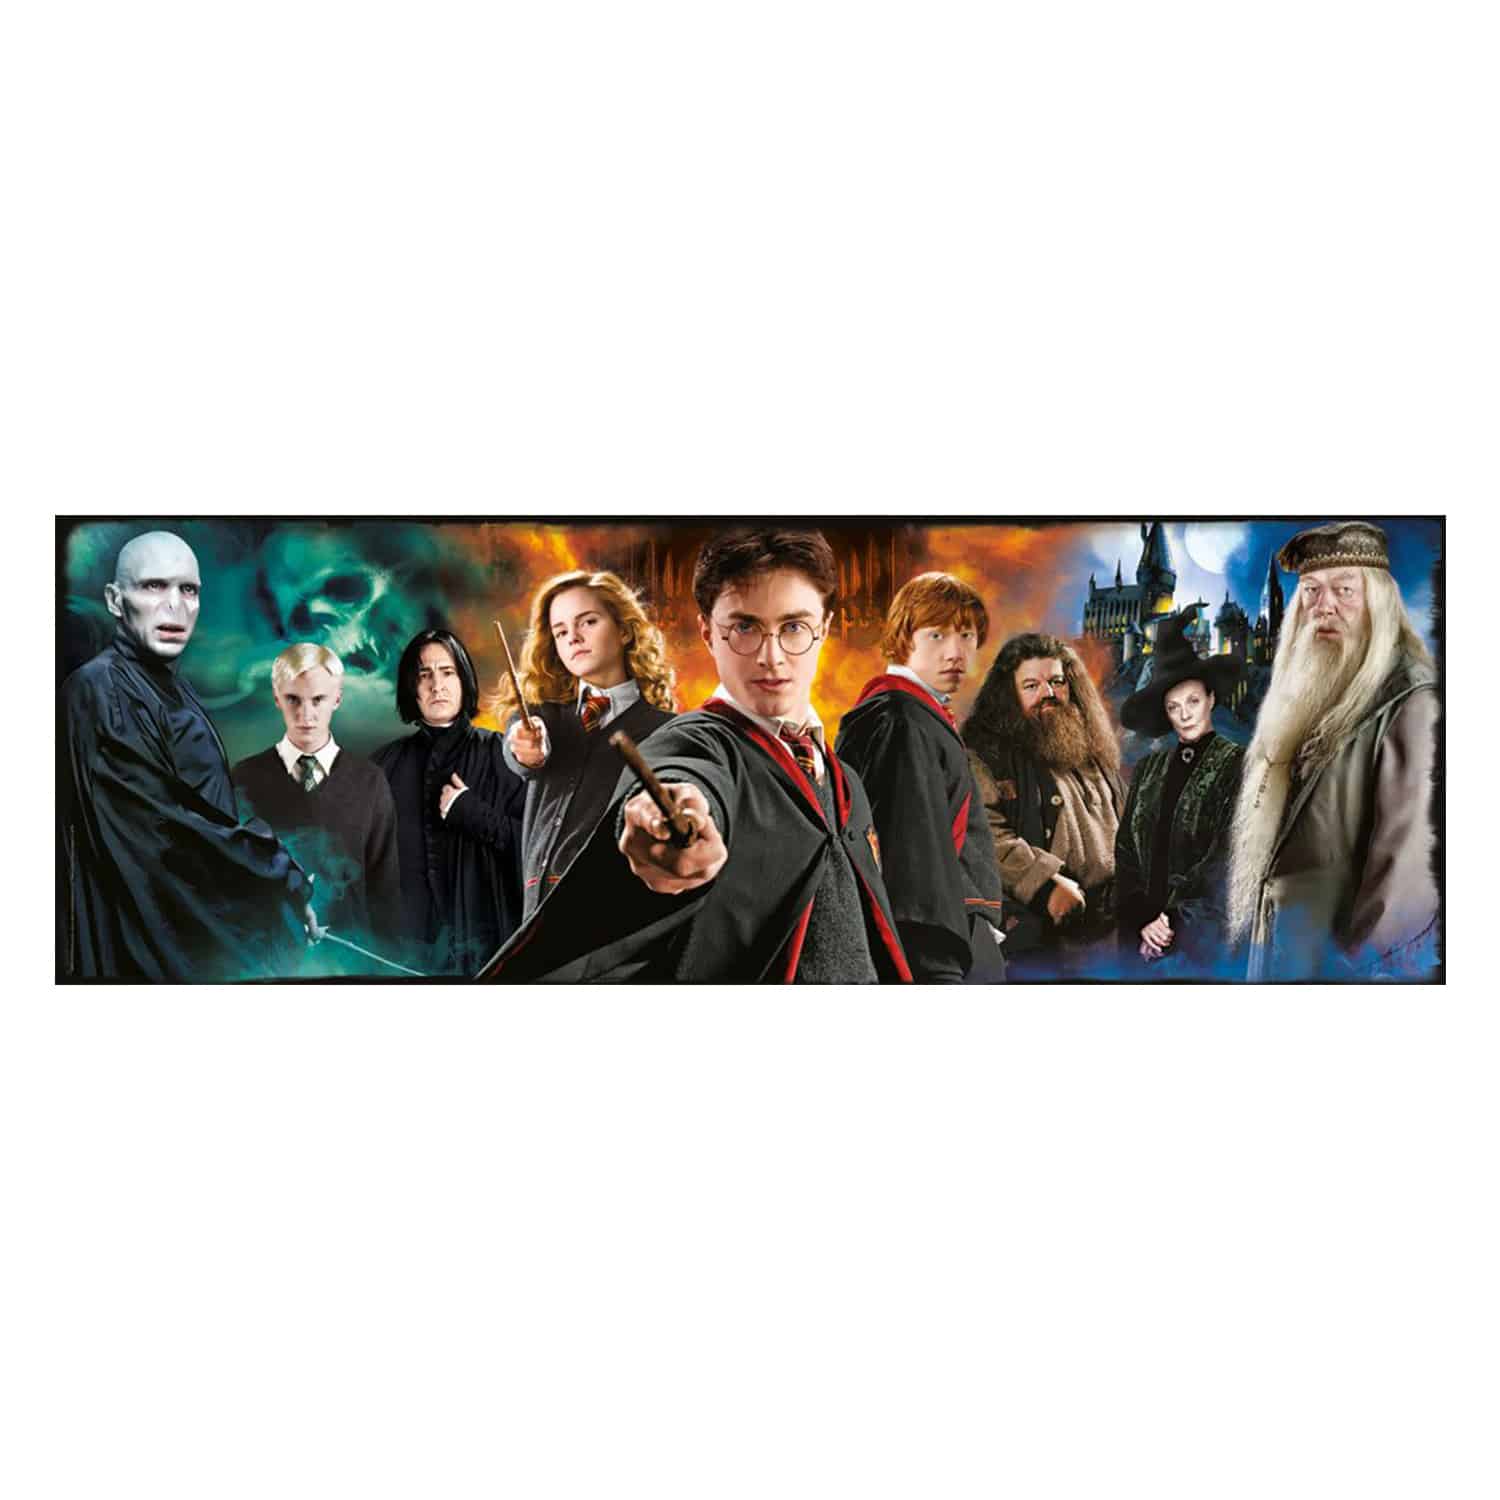 Harry Potter - Characters Panorama Puzzle 1000pcs